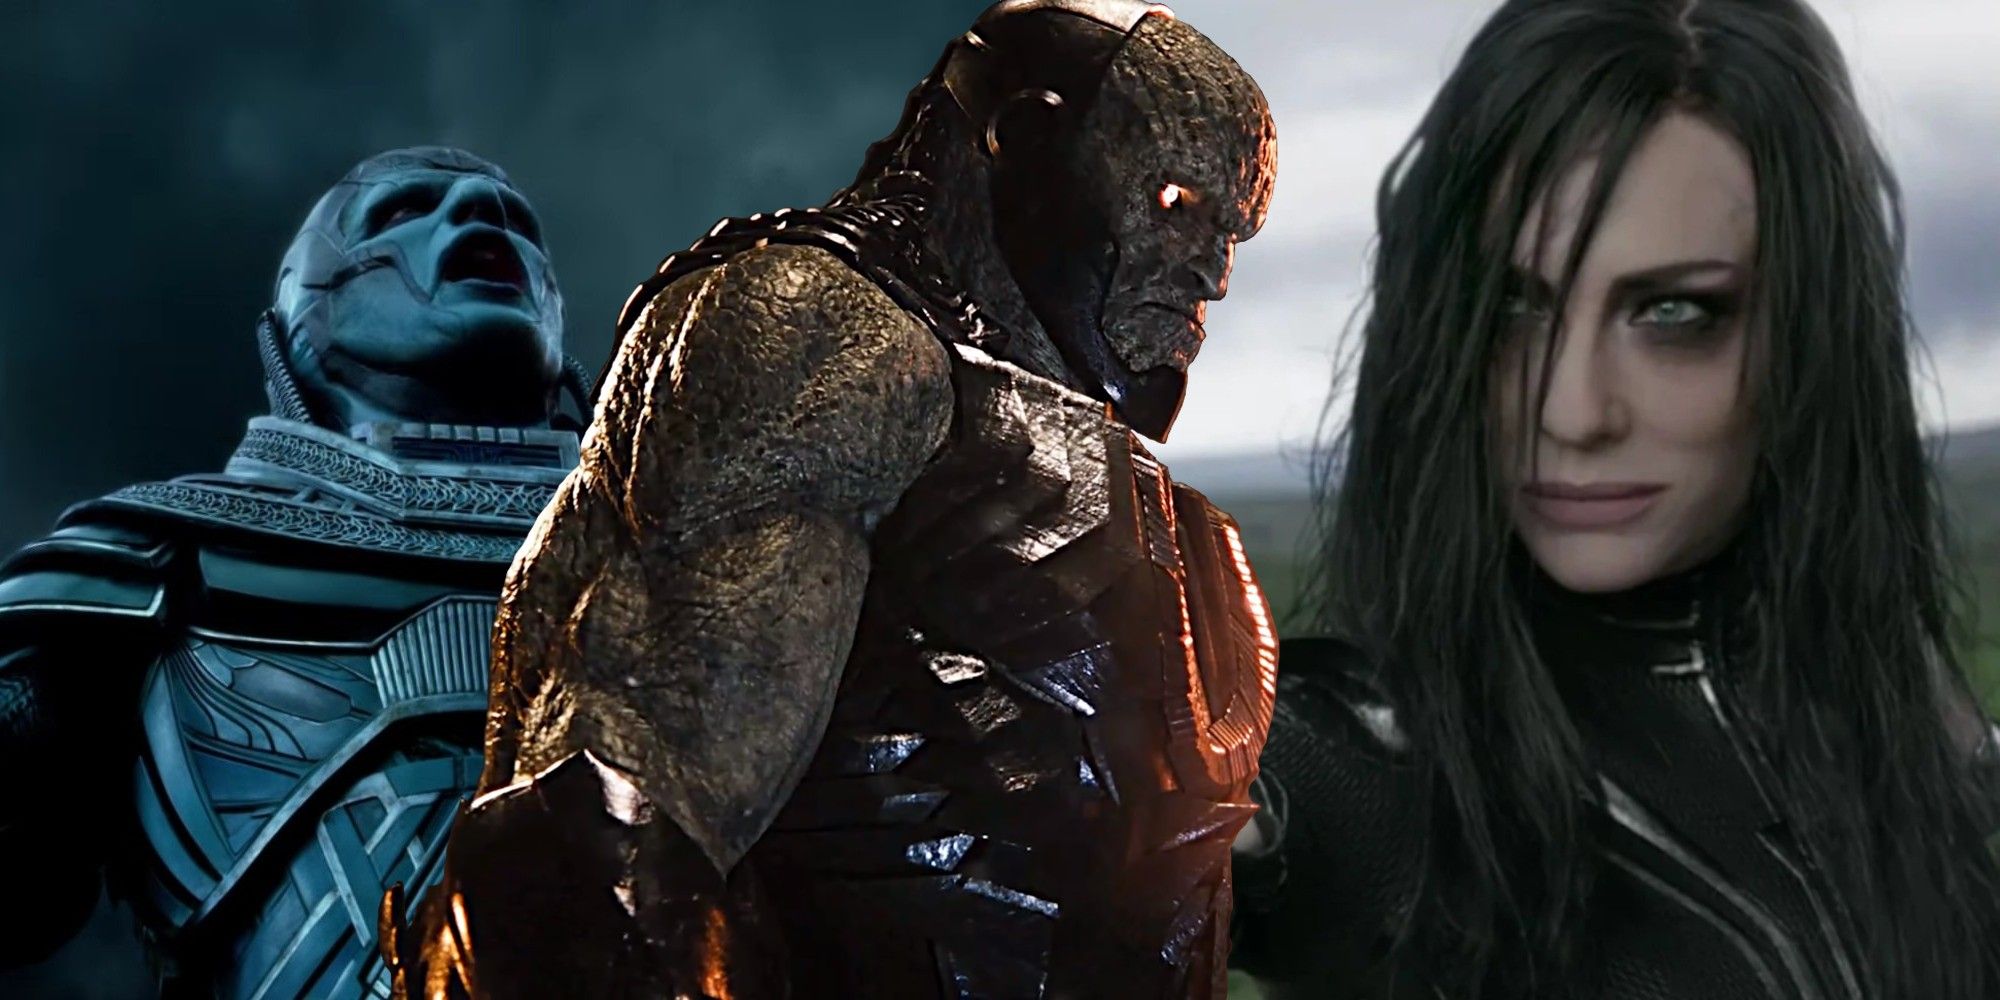 Split image of the live-action movie version of Apocalypse, Darkseid and Hela